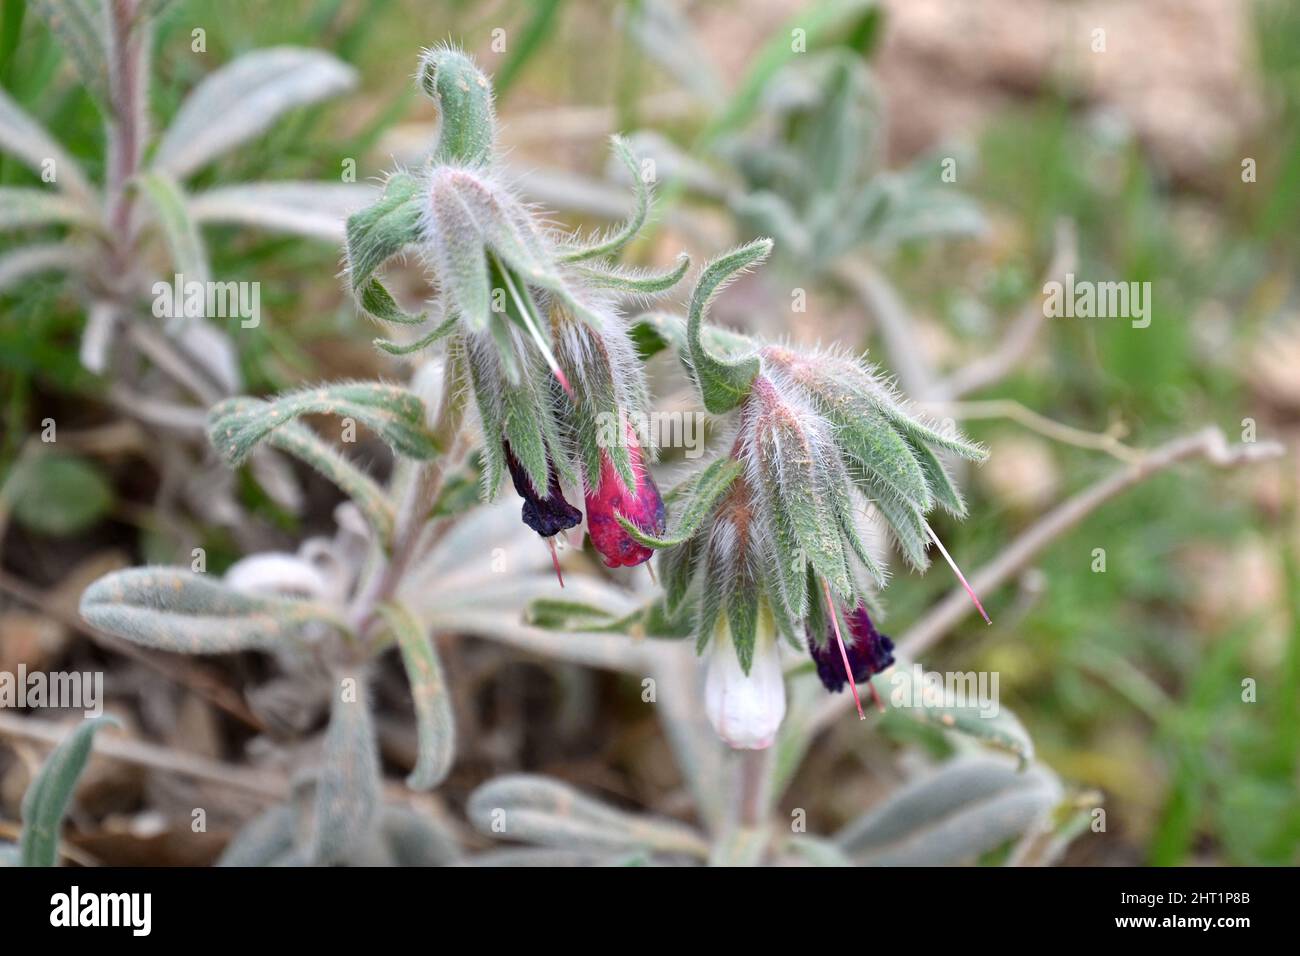 Pulmonaria officinalis, closed pink and purple flowers, hairy petals, photographed in Iraqi Kurdistan. Stock Photo